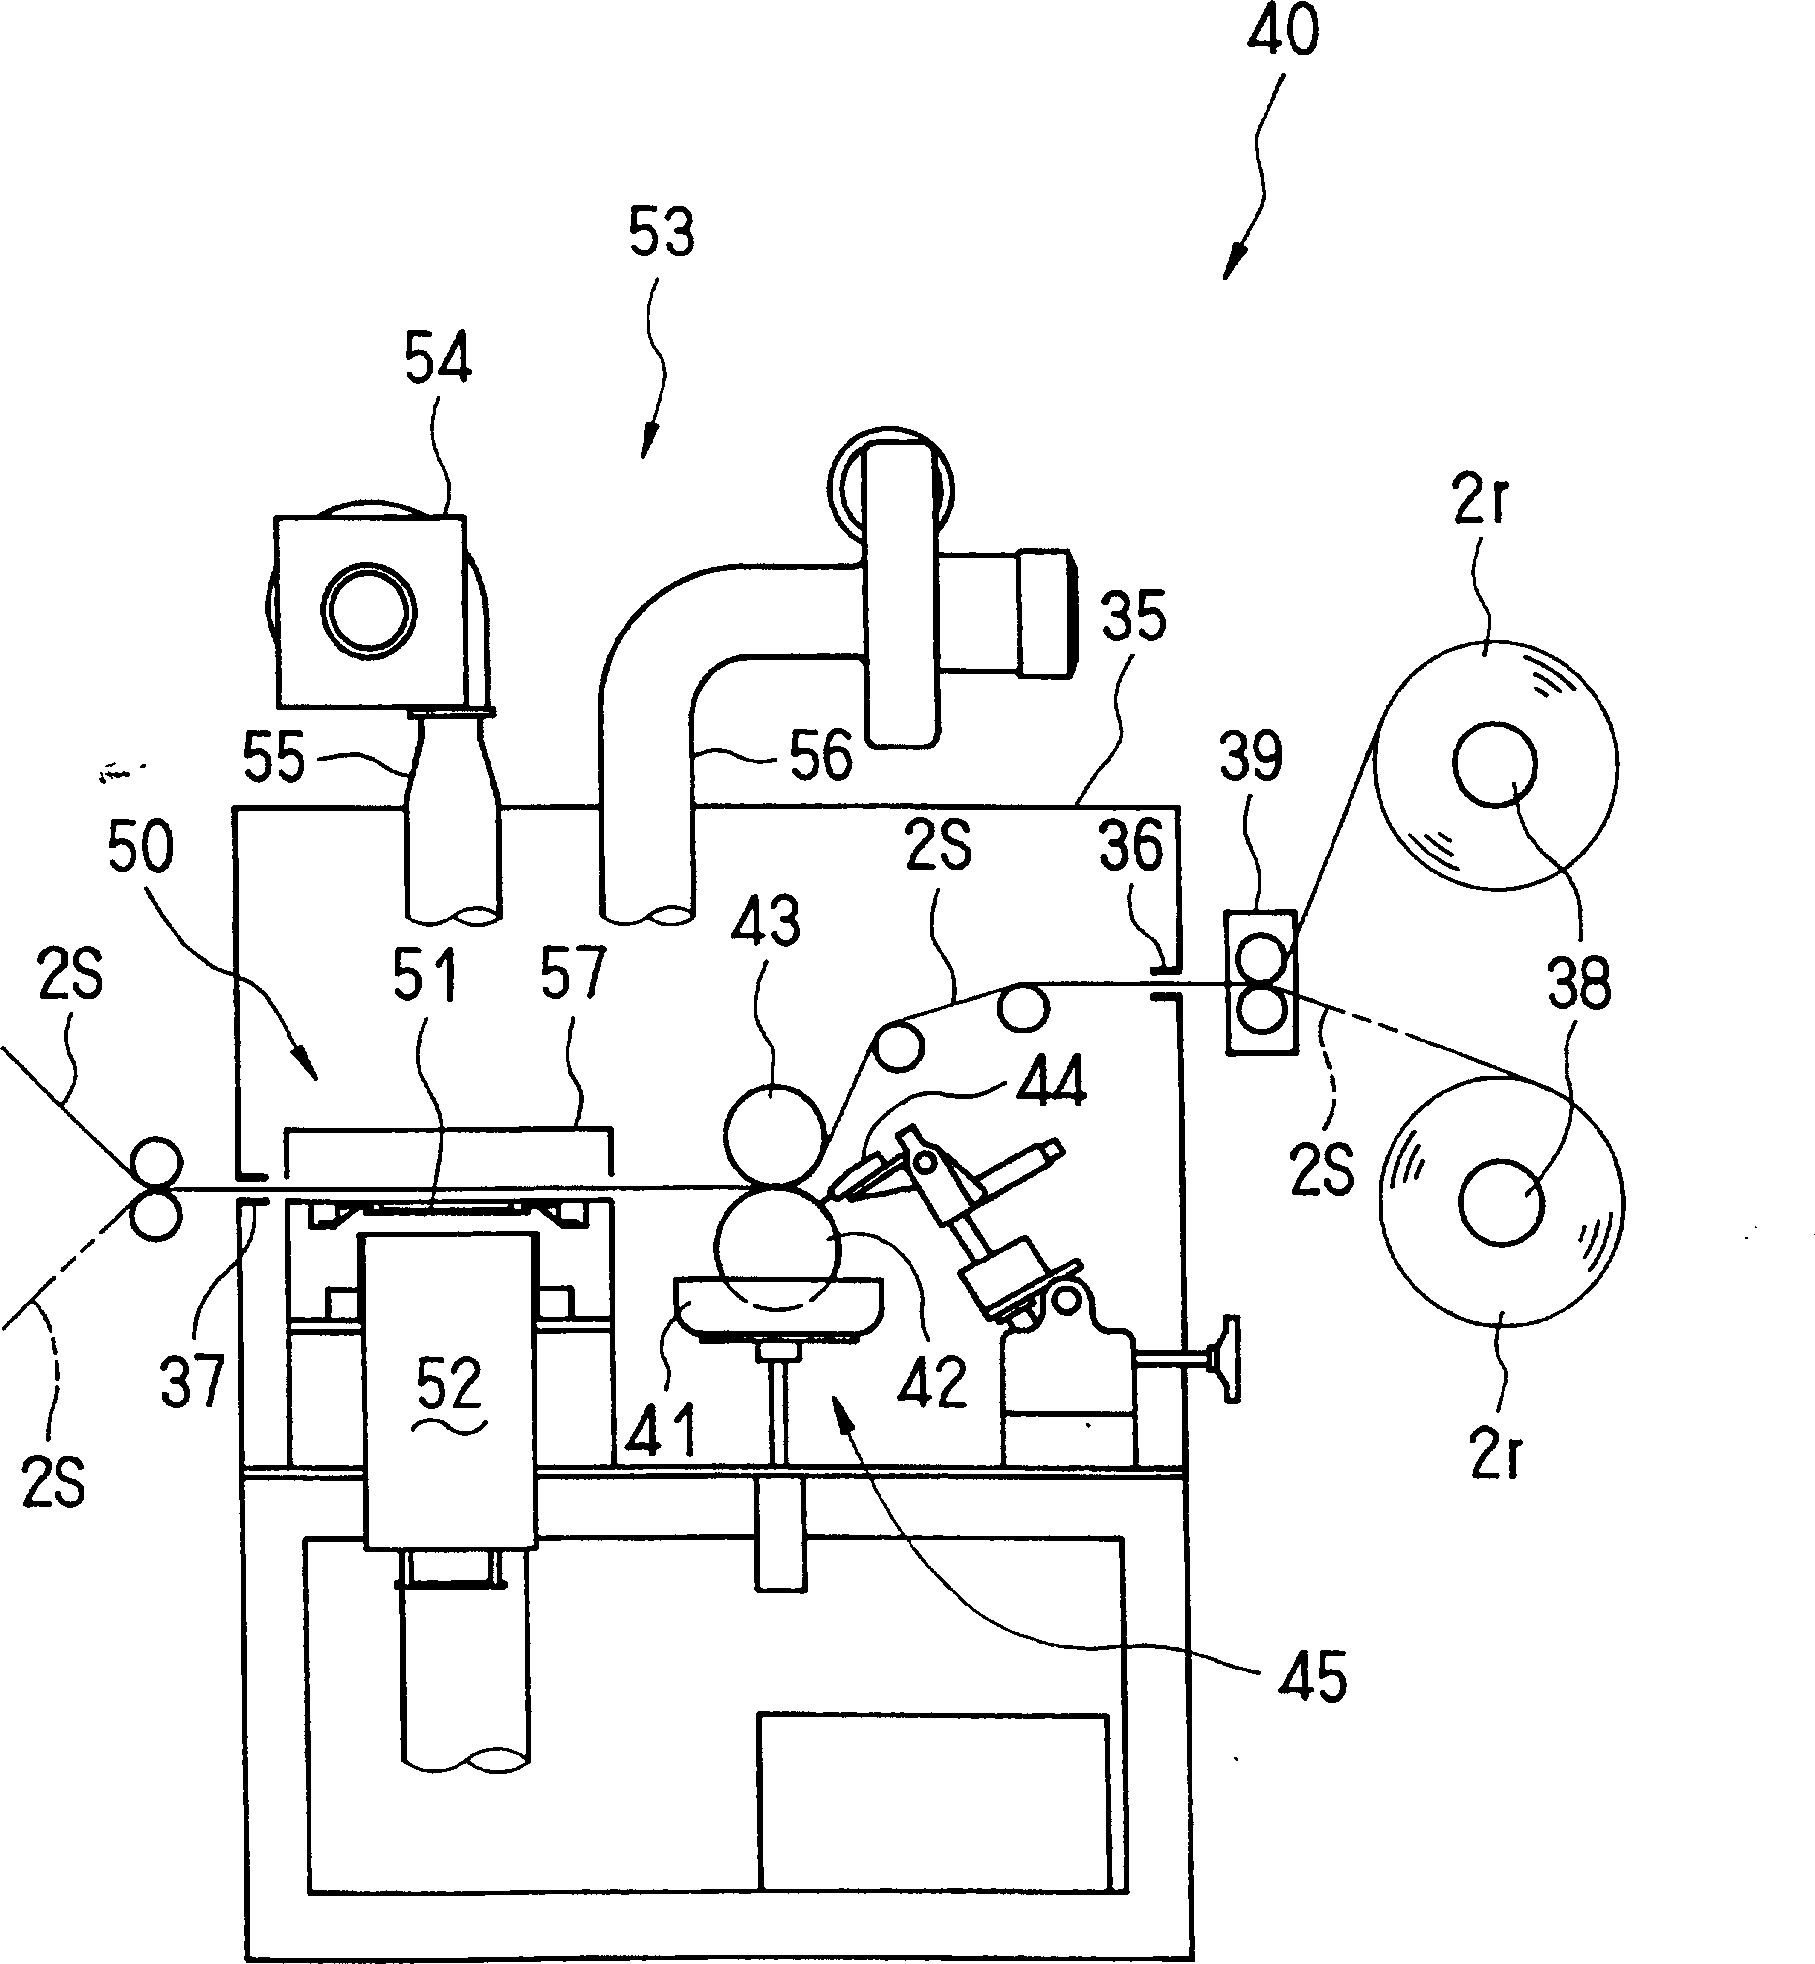 Apparatus for producing sanitary article